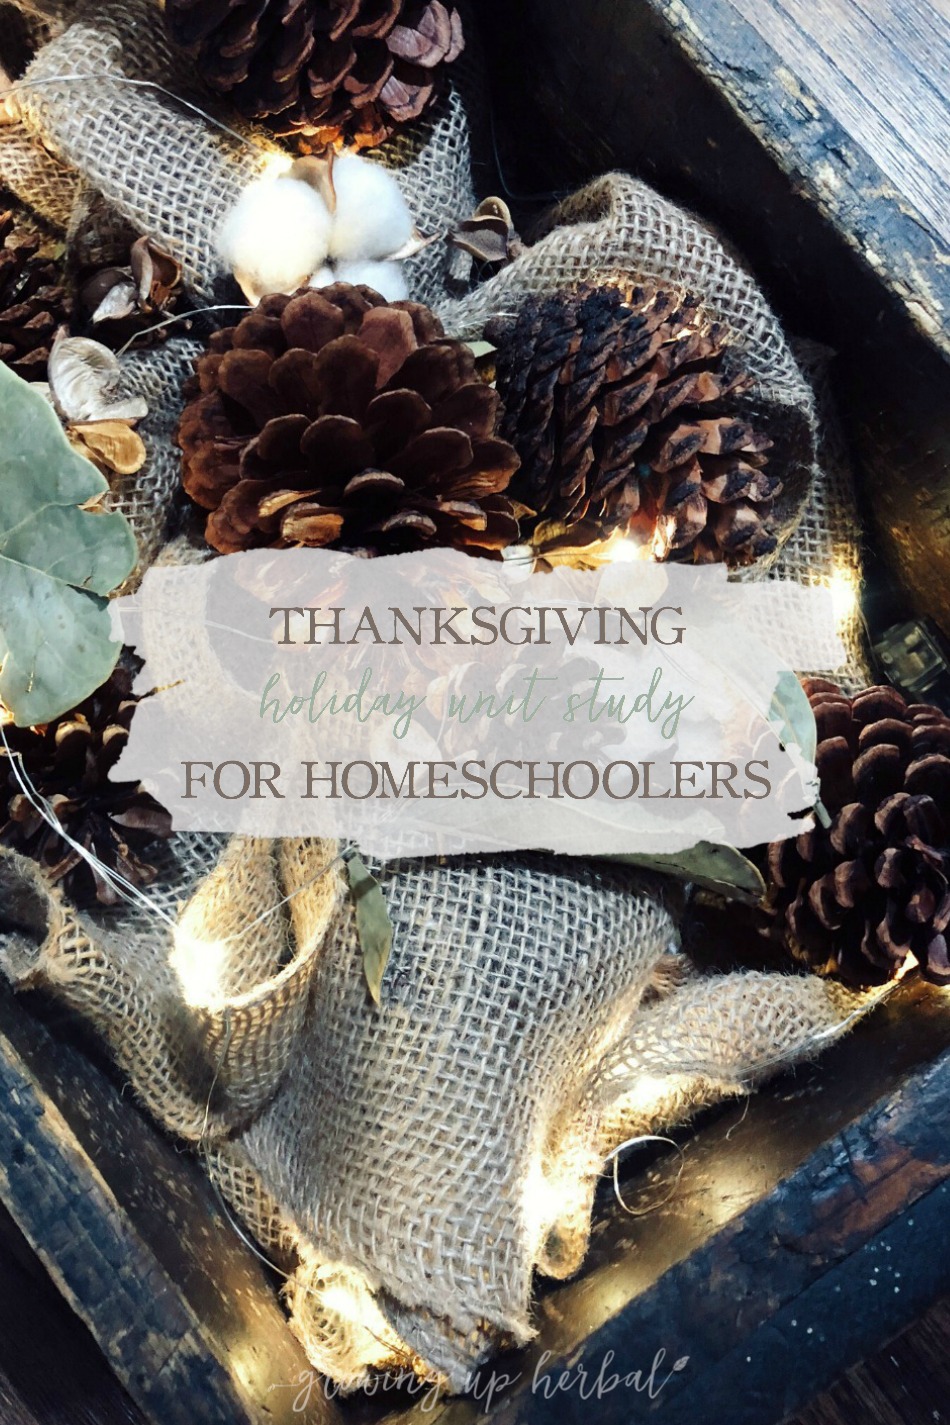 A Thanksgiving Holiday Unit Study for Homeschoolers | Growing Up Herbal | Here’s a quick, one week Thanksgiving holiday unit study that’s fun for homeschoolers.